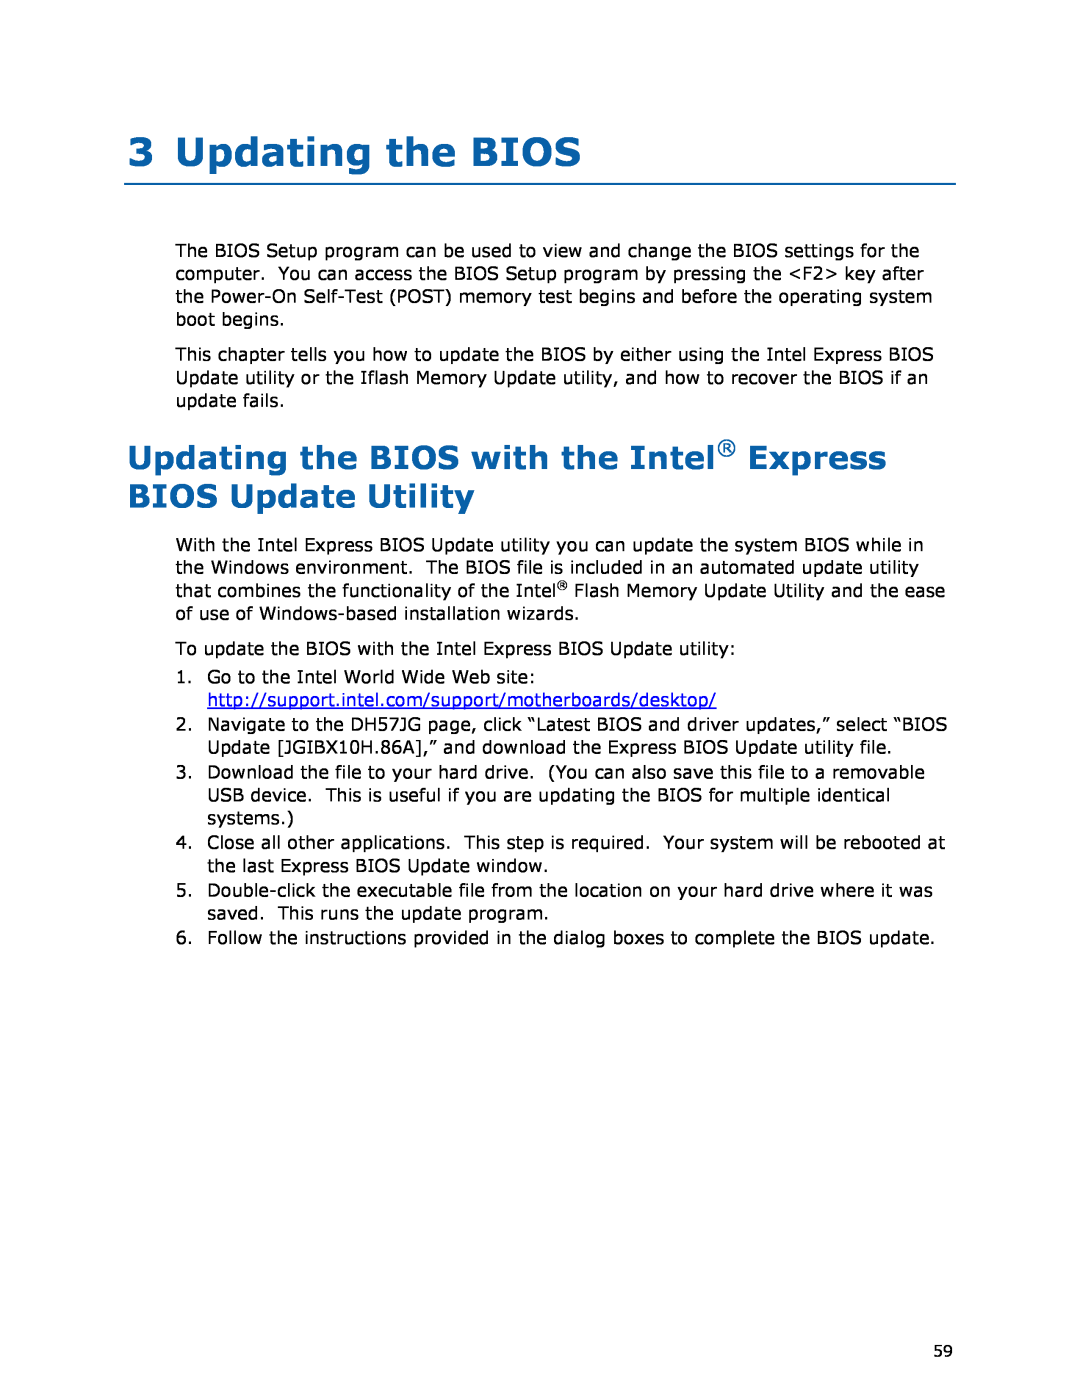 Intel BLKDH57JG manual Updating the BIOS with the Intel Express BIOS Update Utility 